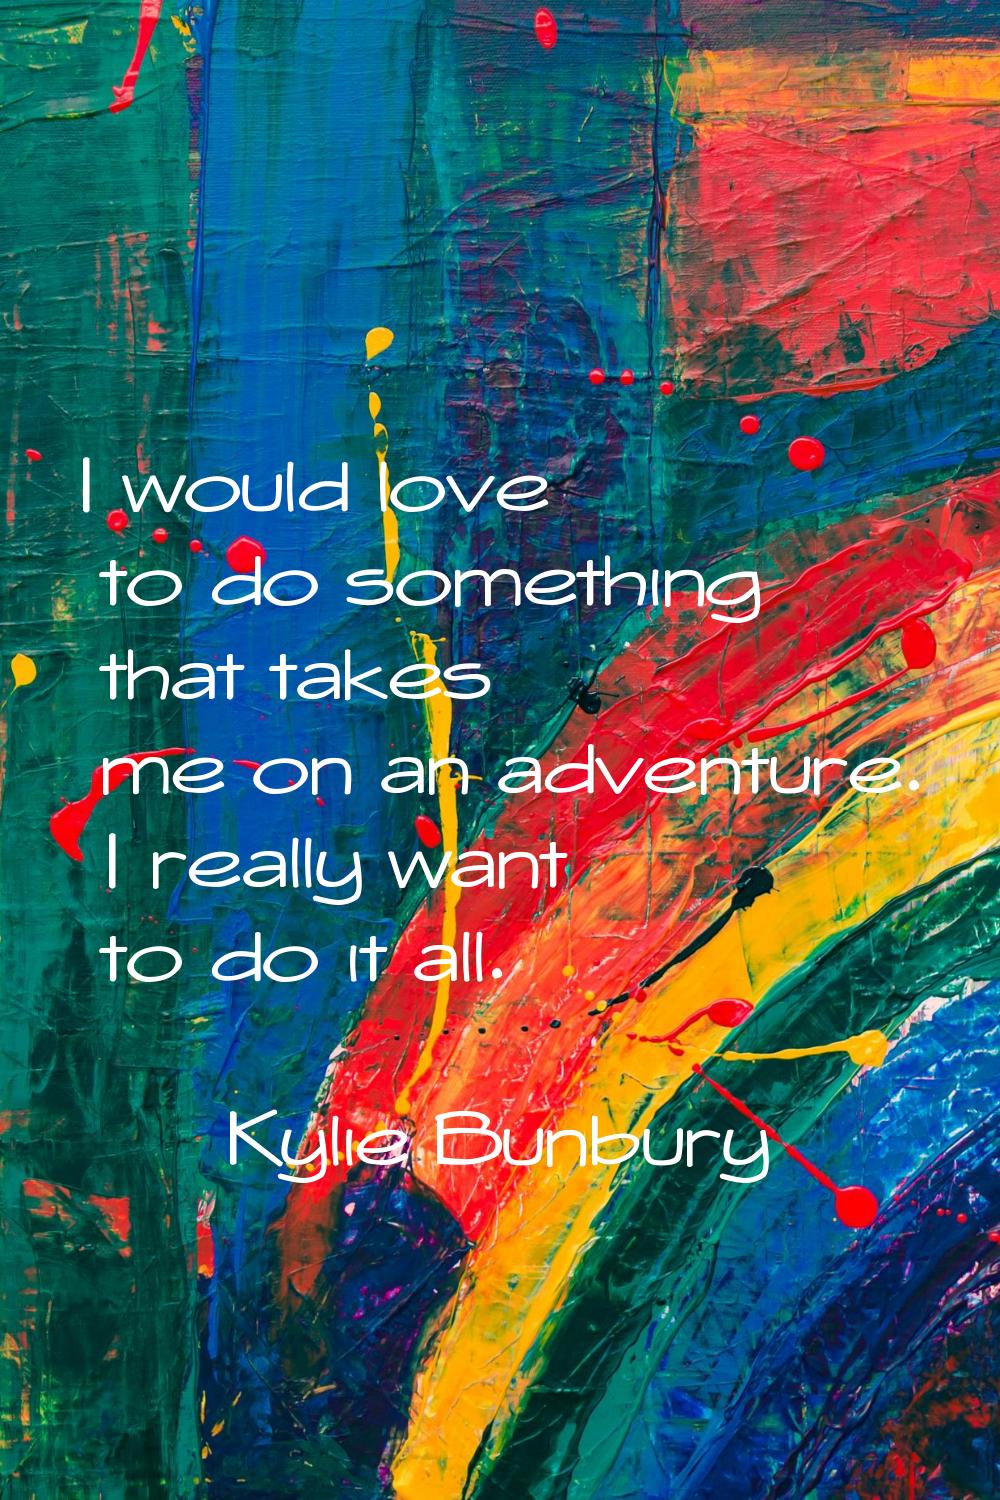 I would love to do something that takes me on an adventure. I really want to do it all.